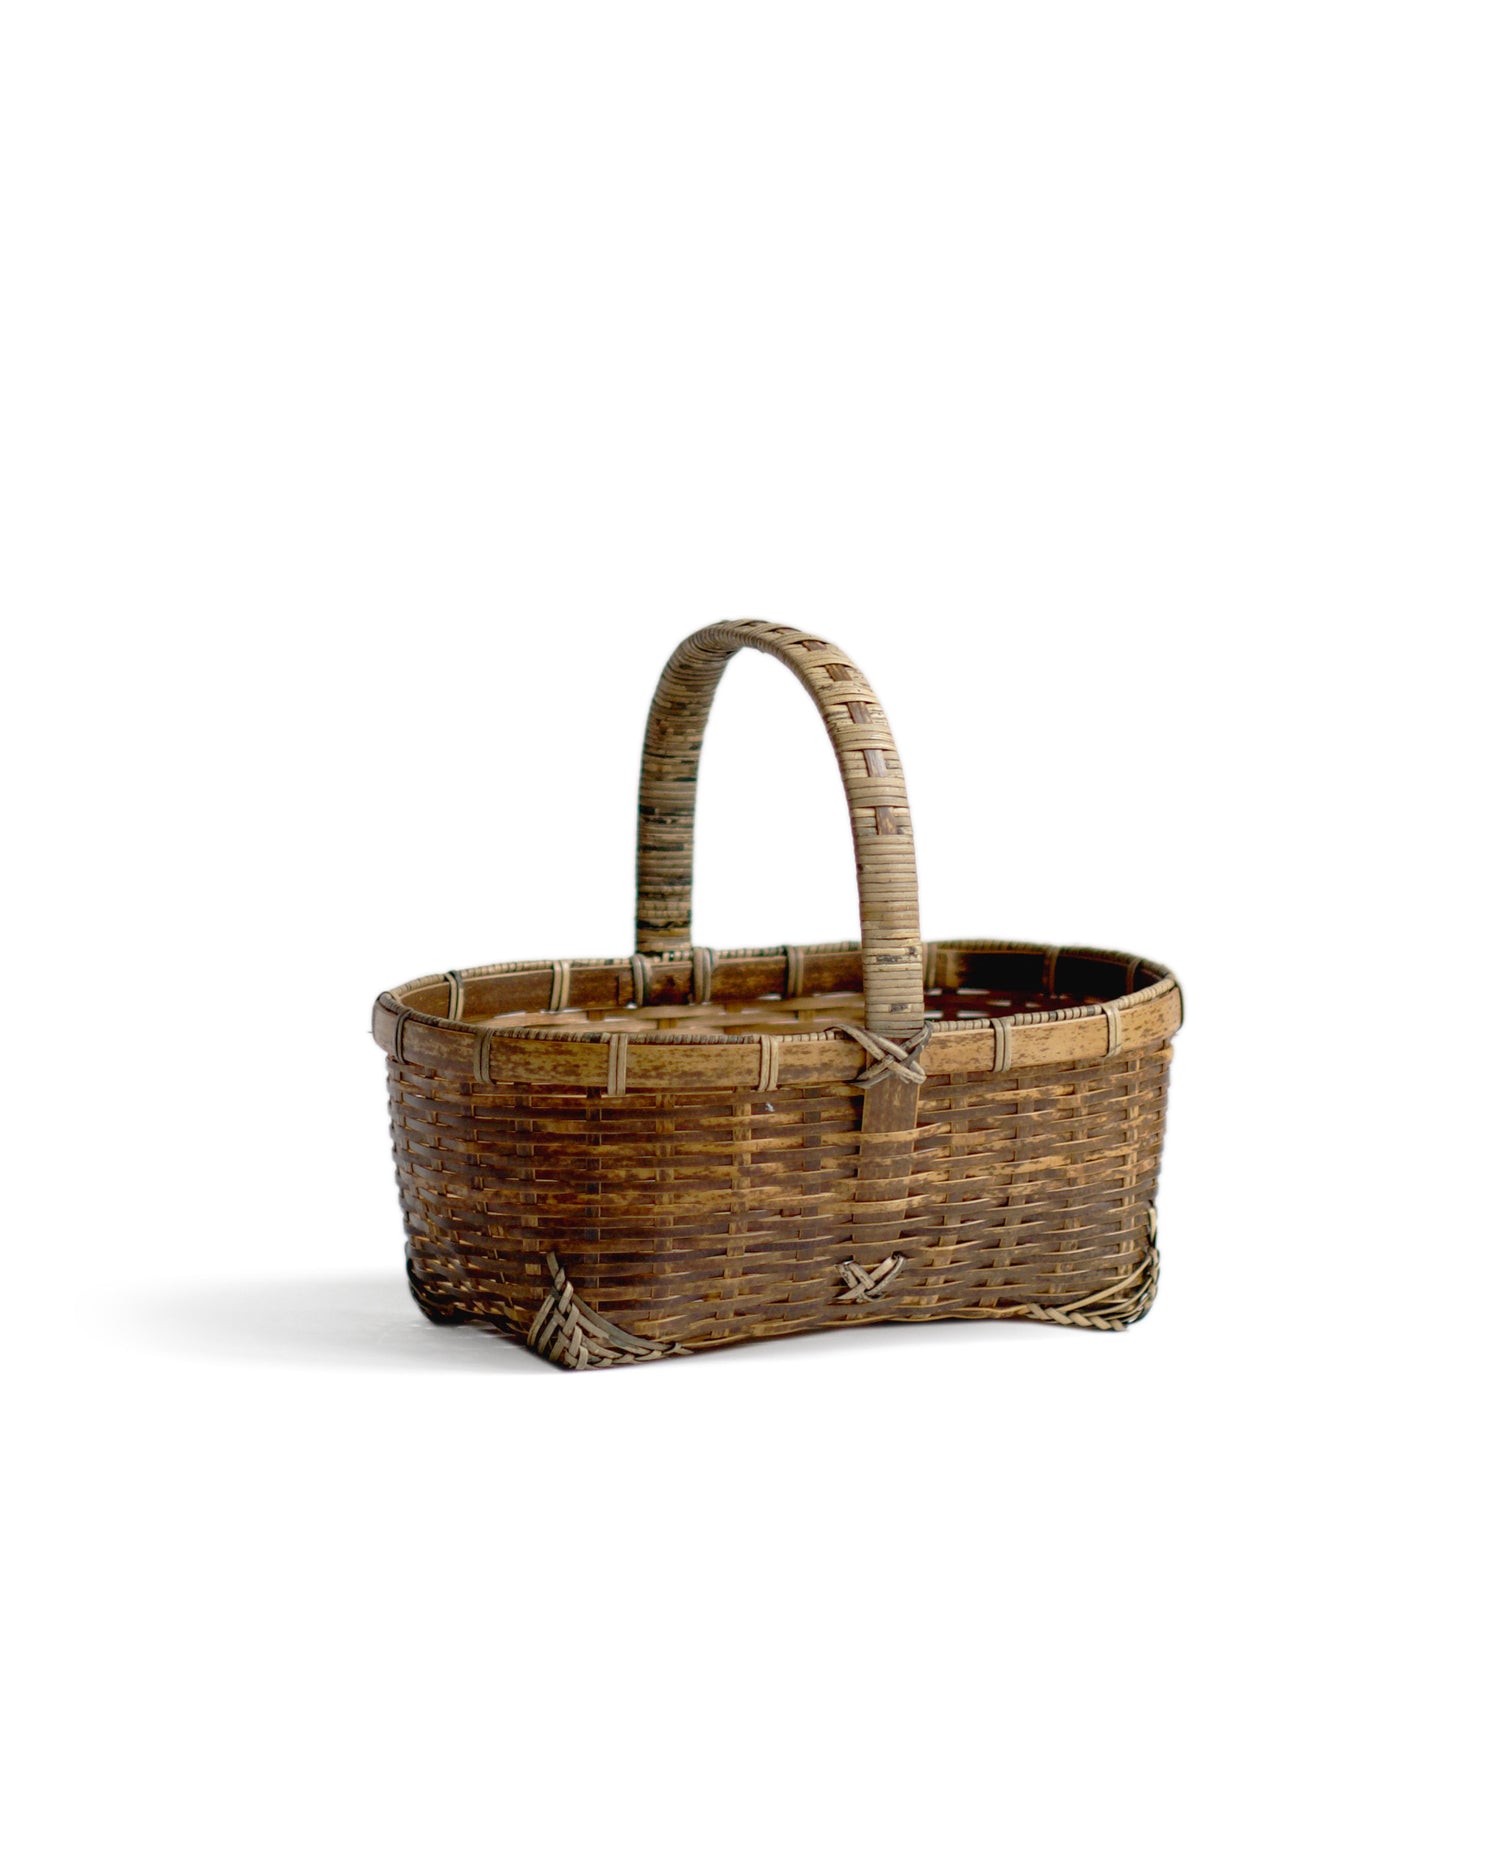 Silhouetted angled  image of small toradake bread basket with handle by Kohchosai Kosuga against white background.